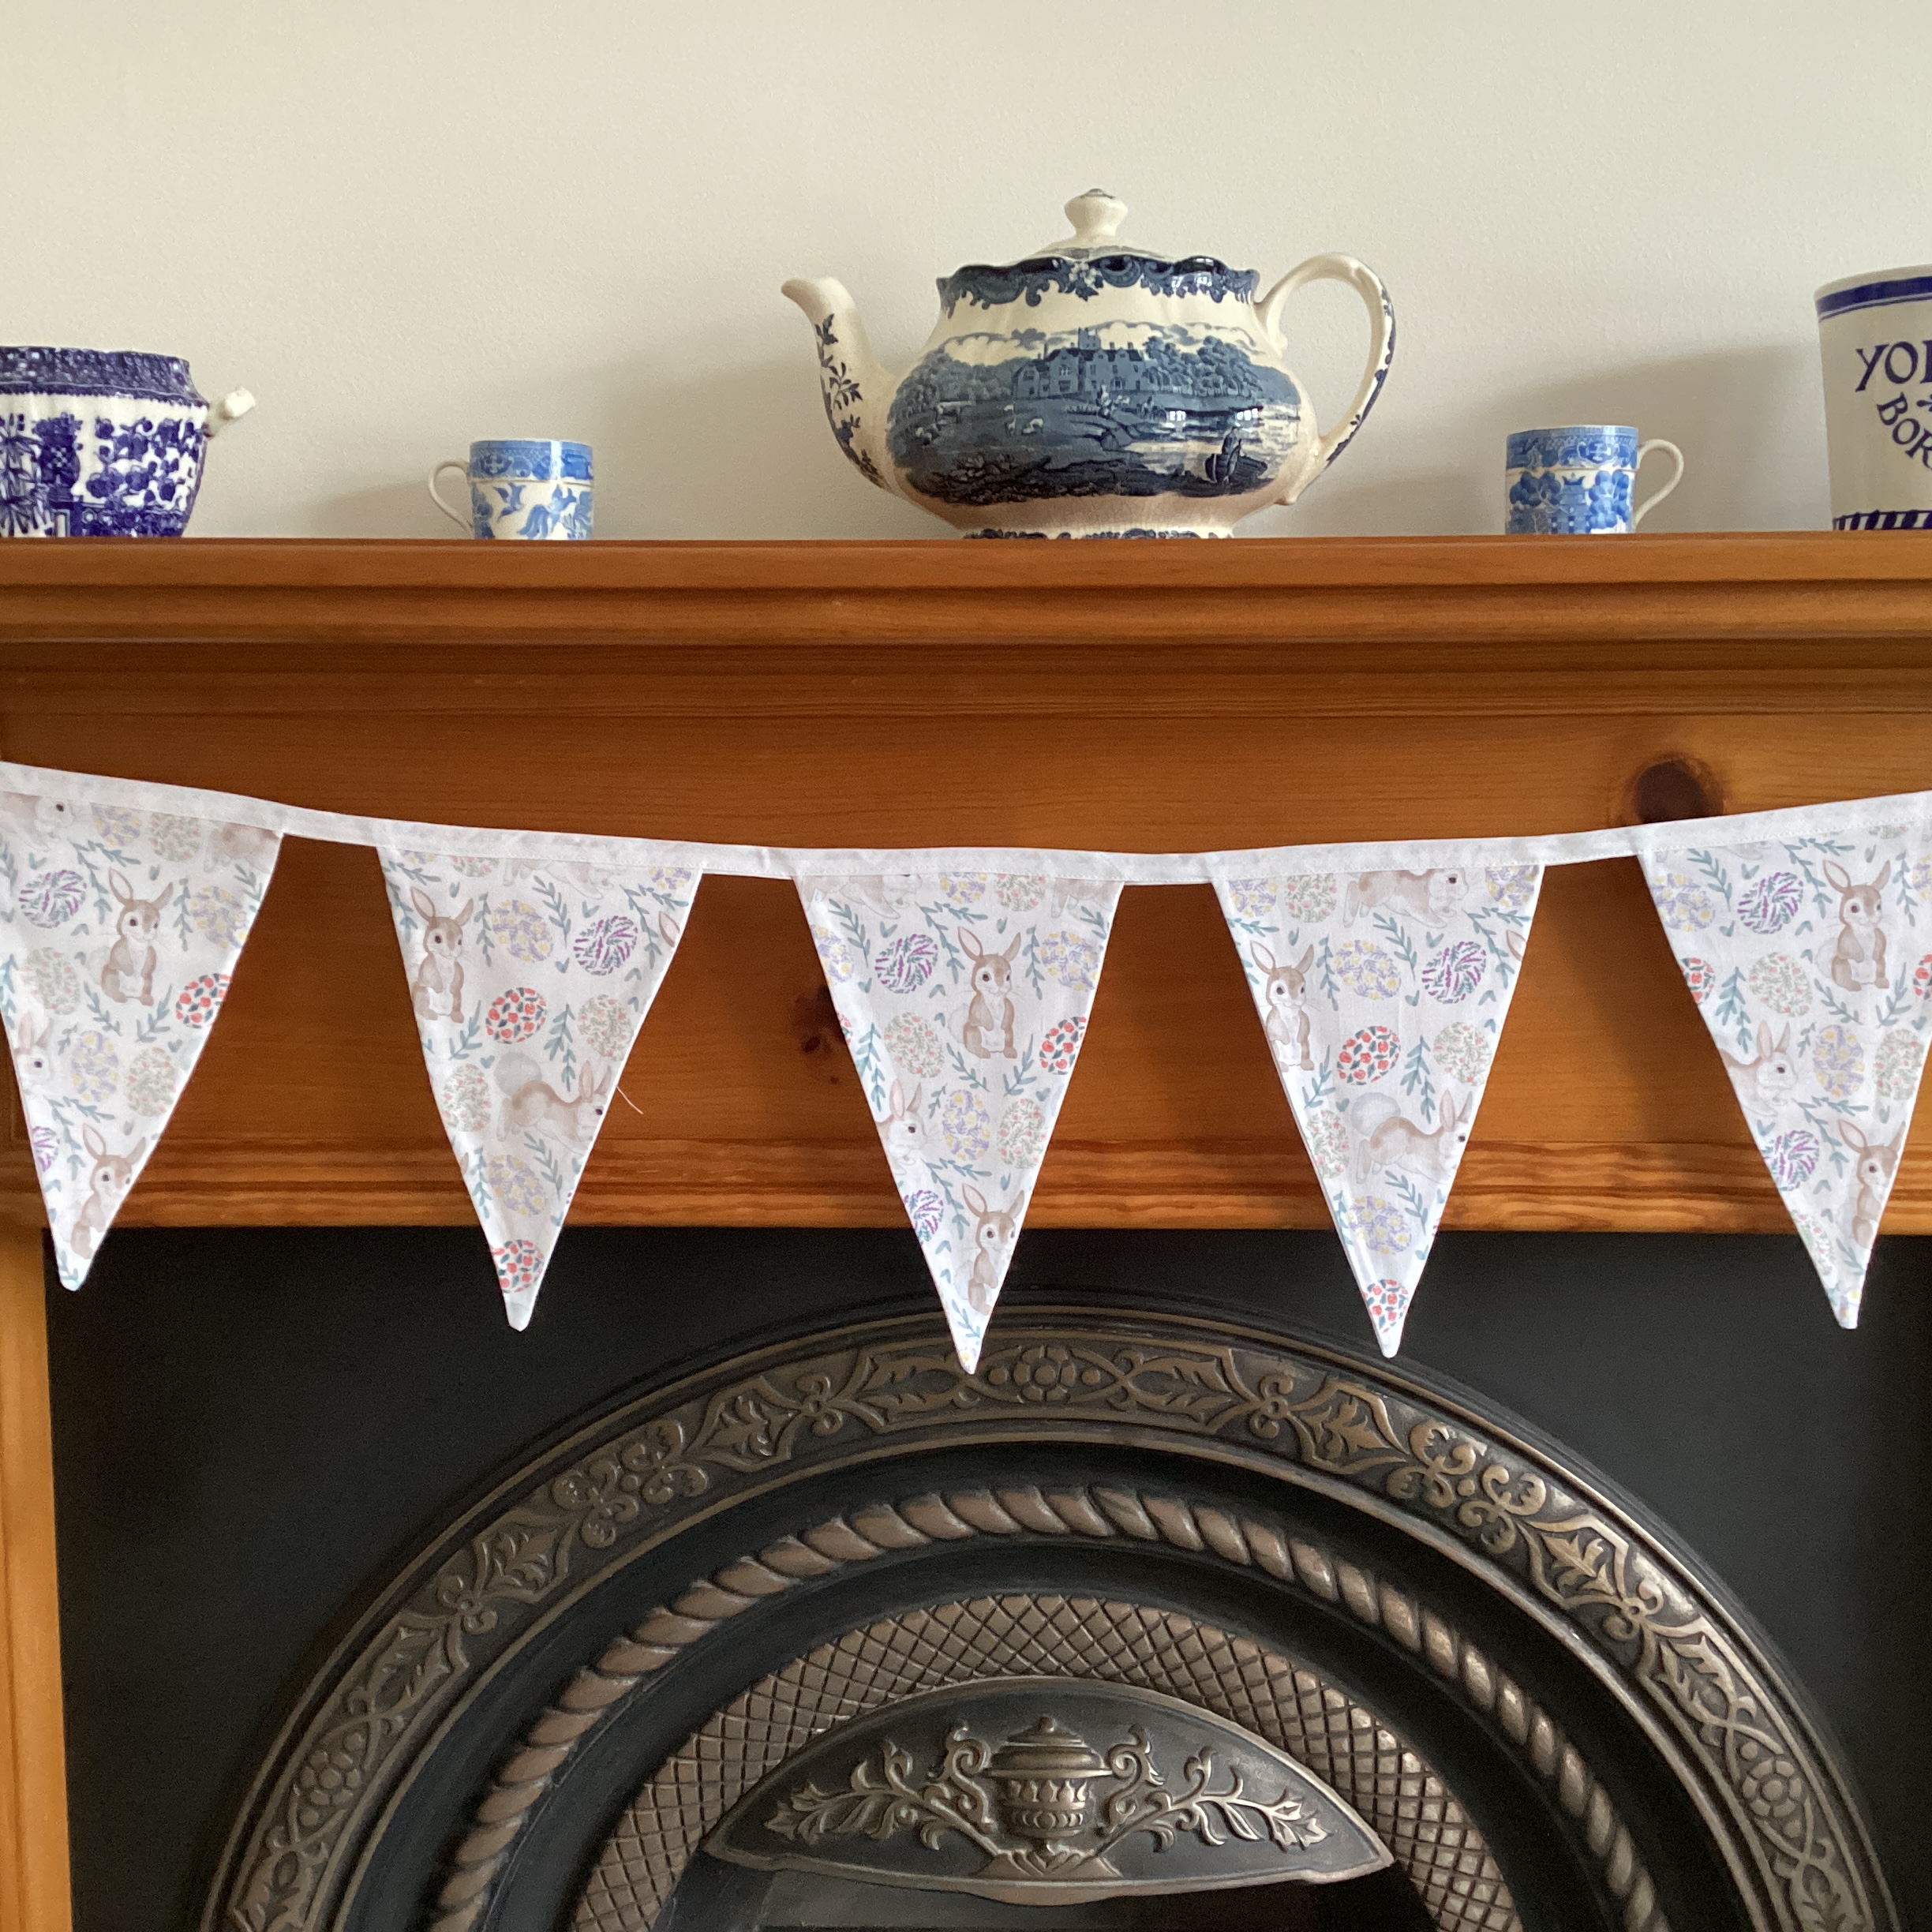 Bunting - Easter rabbits